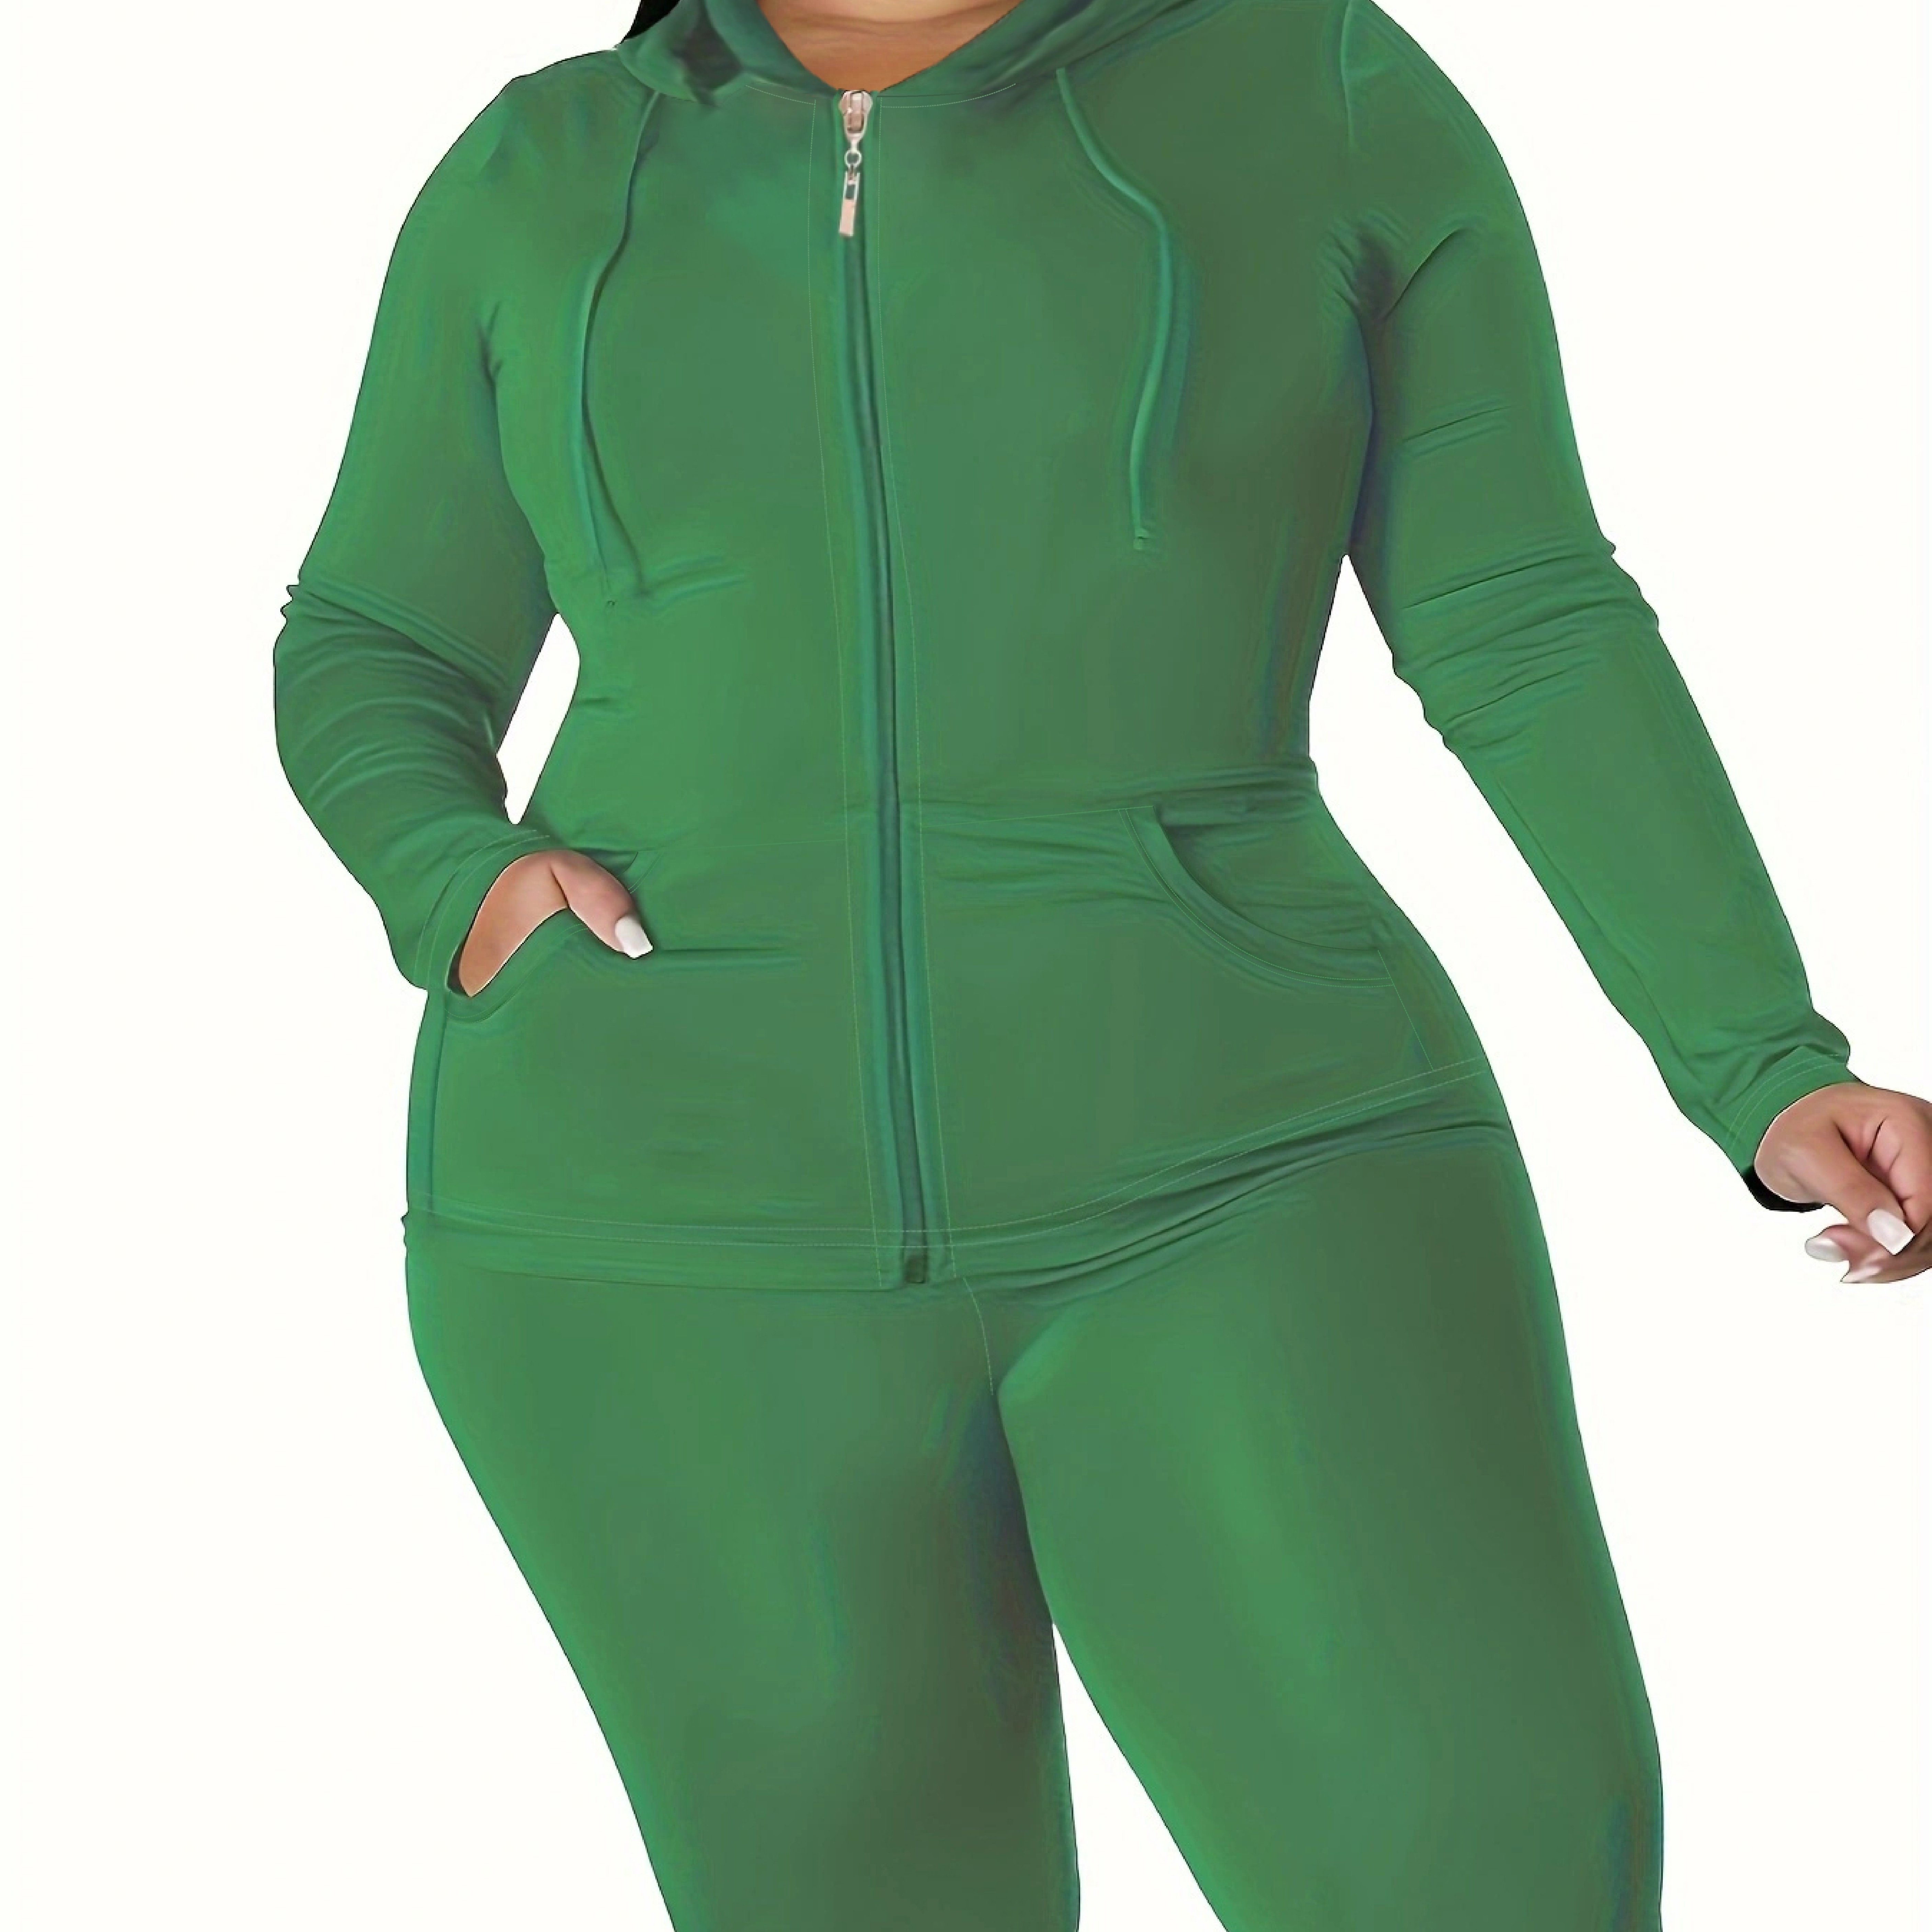 Dropship Plus Size Solid Zip Up Hoodie Sweatshirt & Pants Set; Women's Plus  High Stretch Workout 2pcs Set to Sell Online at a Lower Price